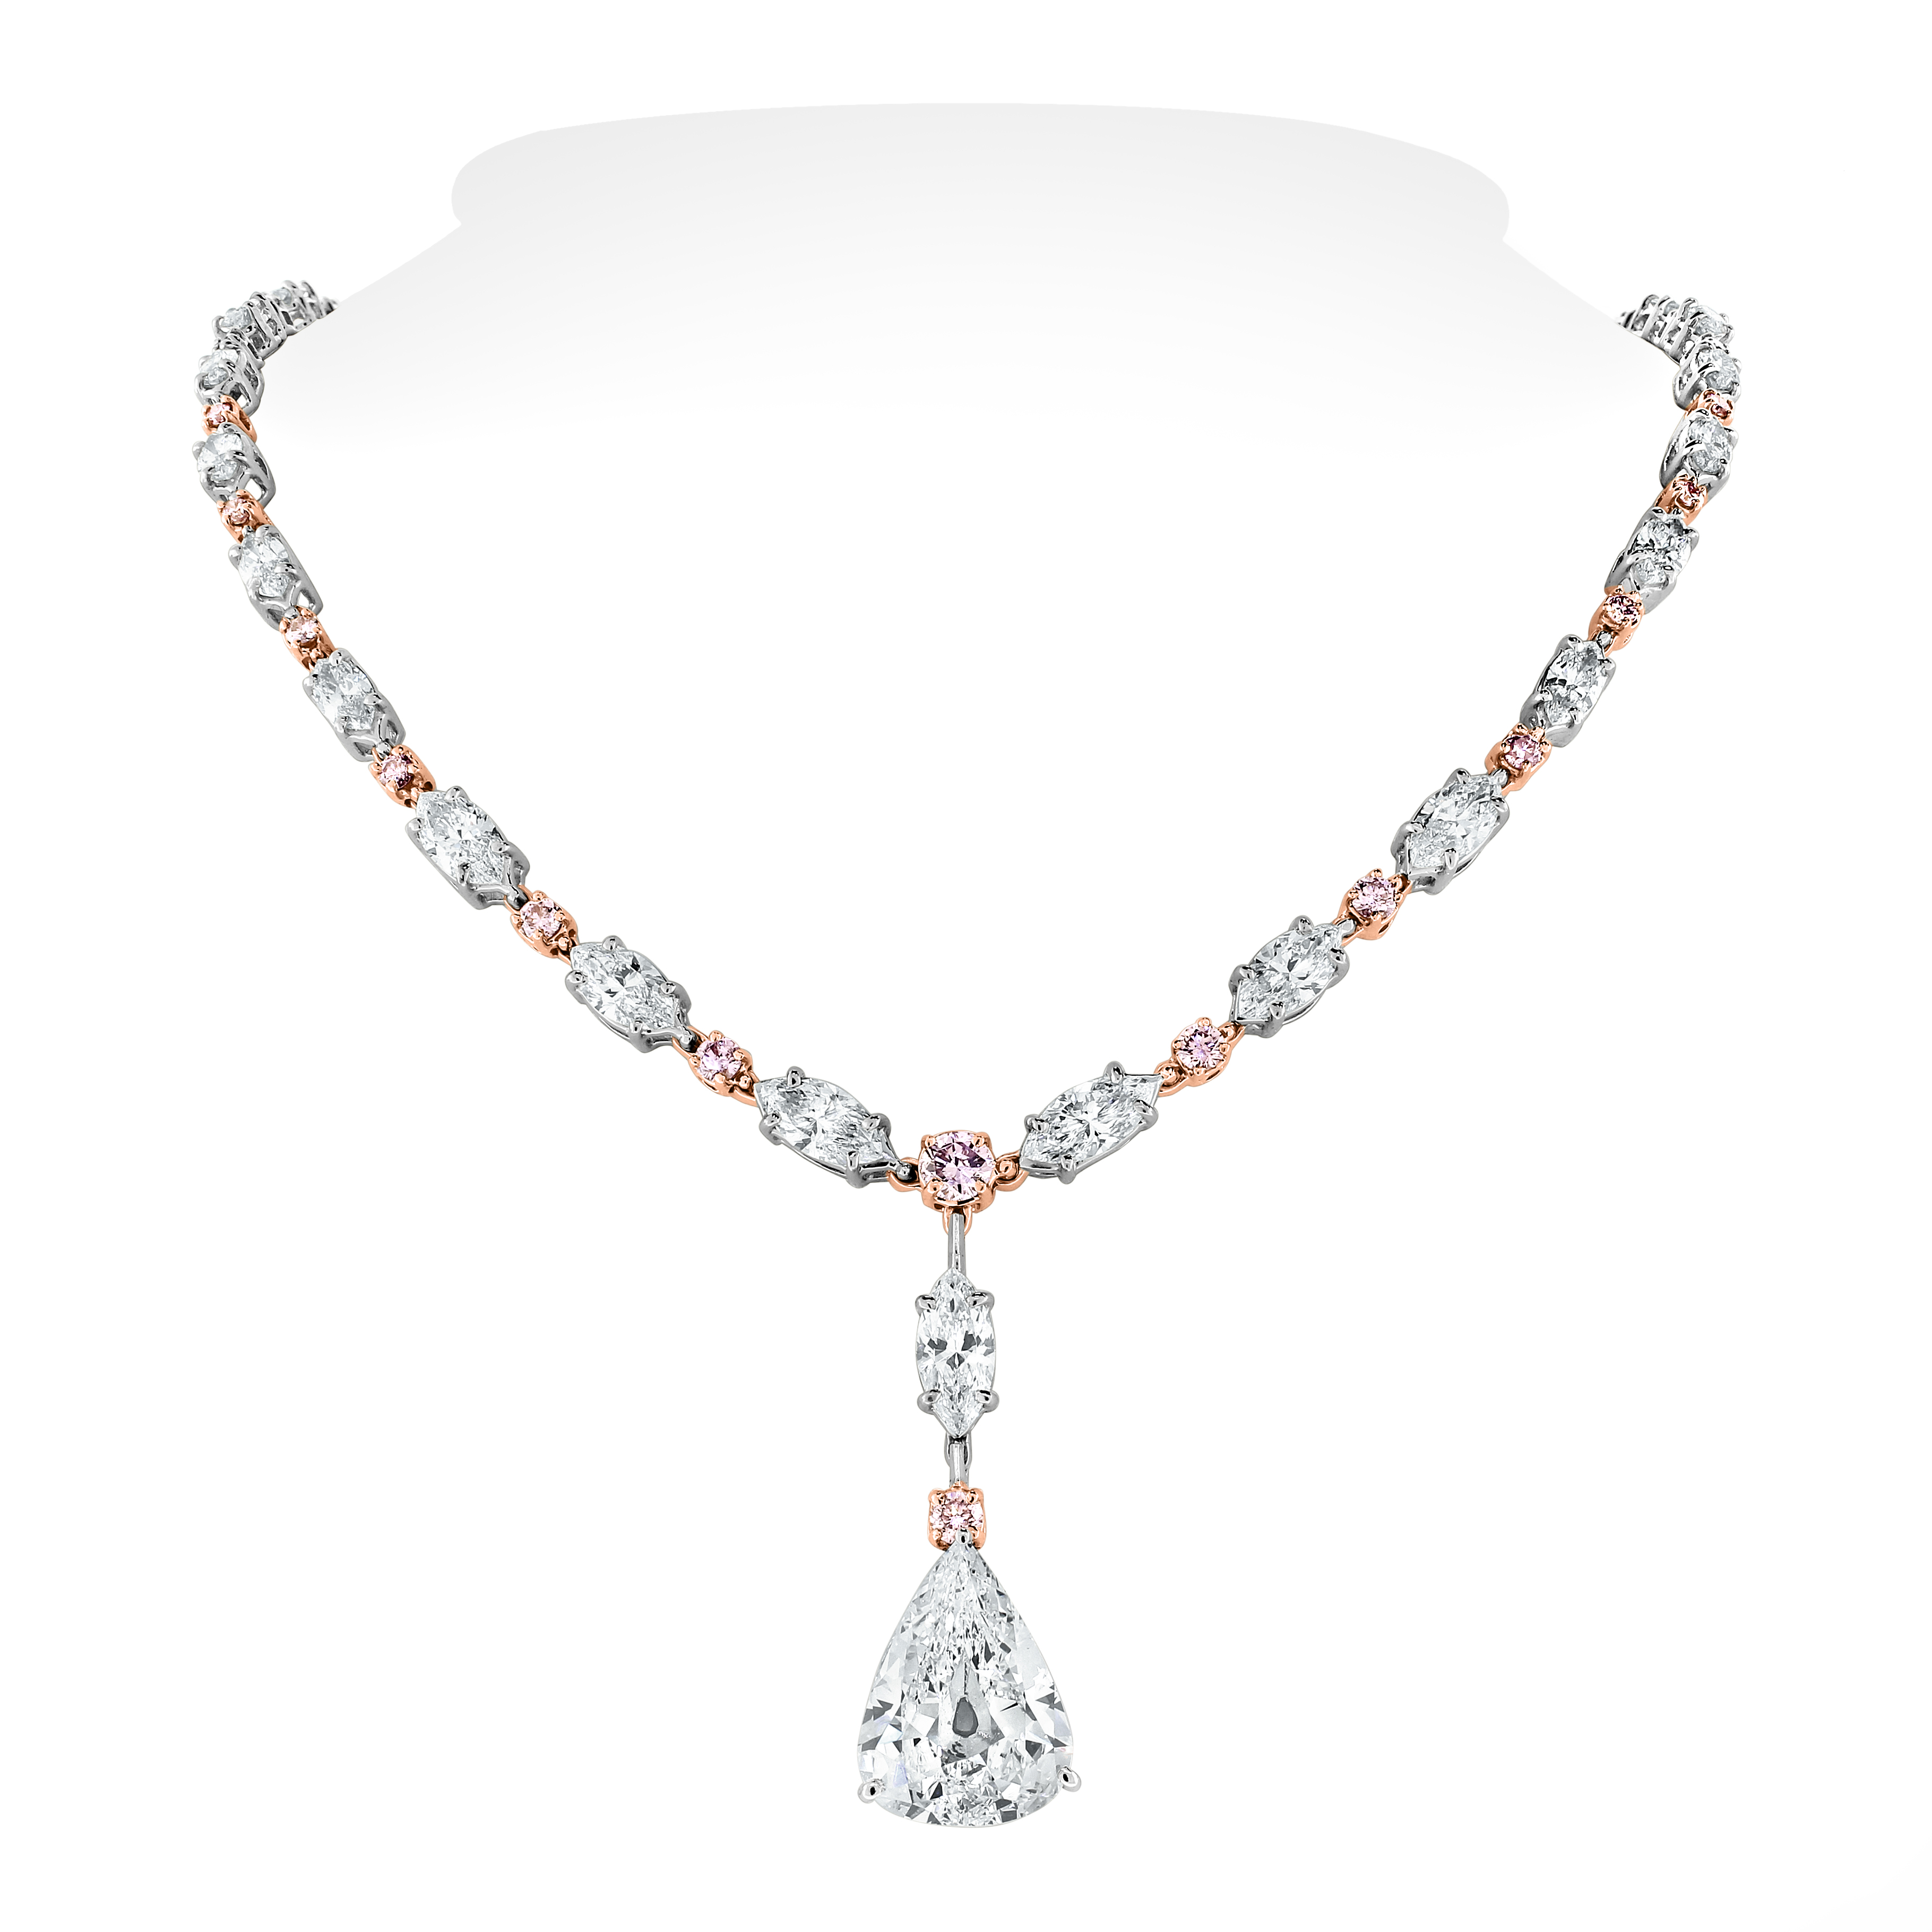 Beauvince Ariana Diamond Necklace (17.76 ct. Diamonds) in Gold